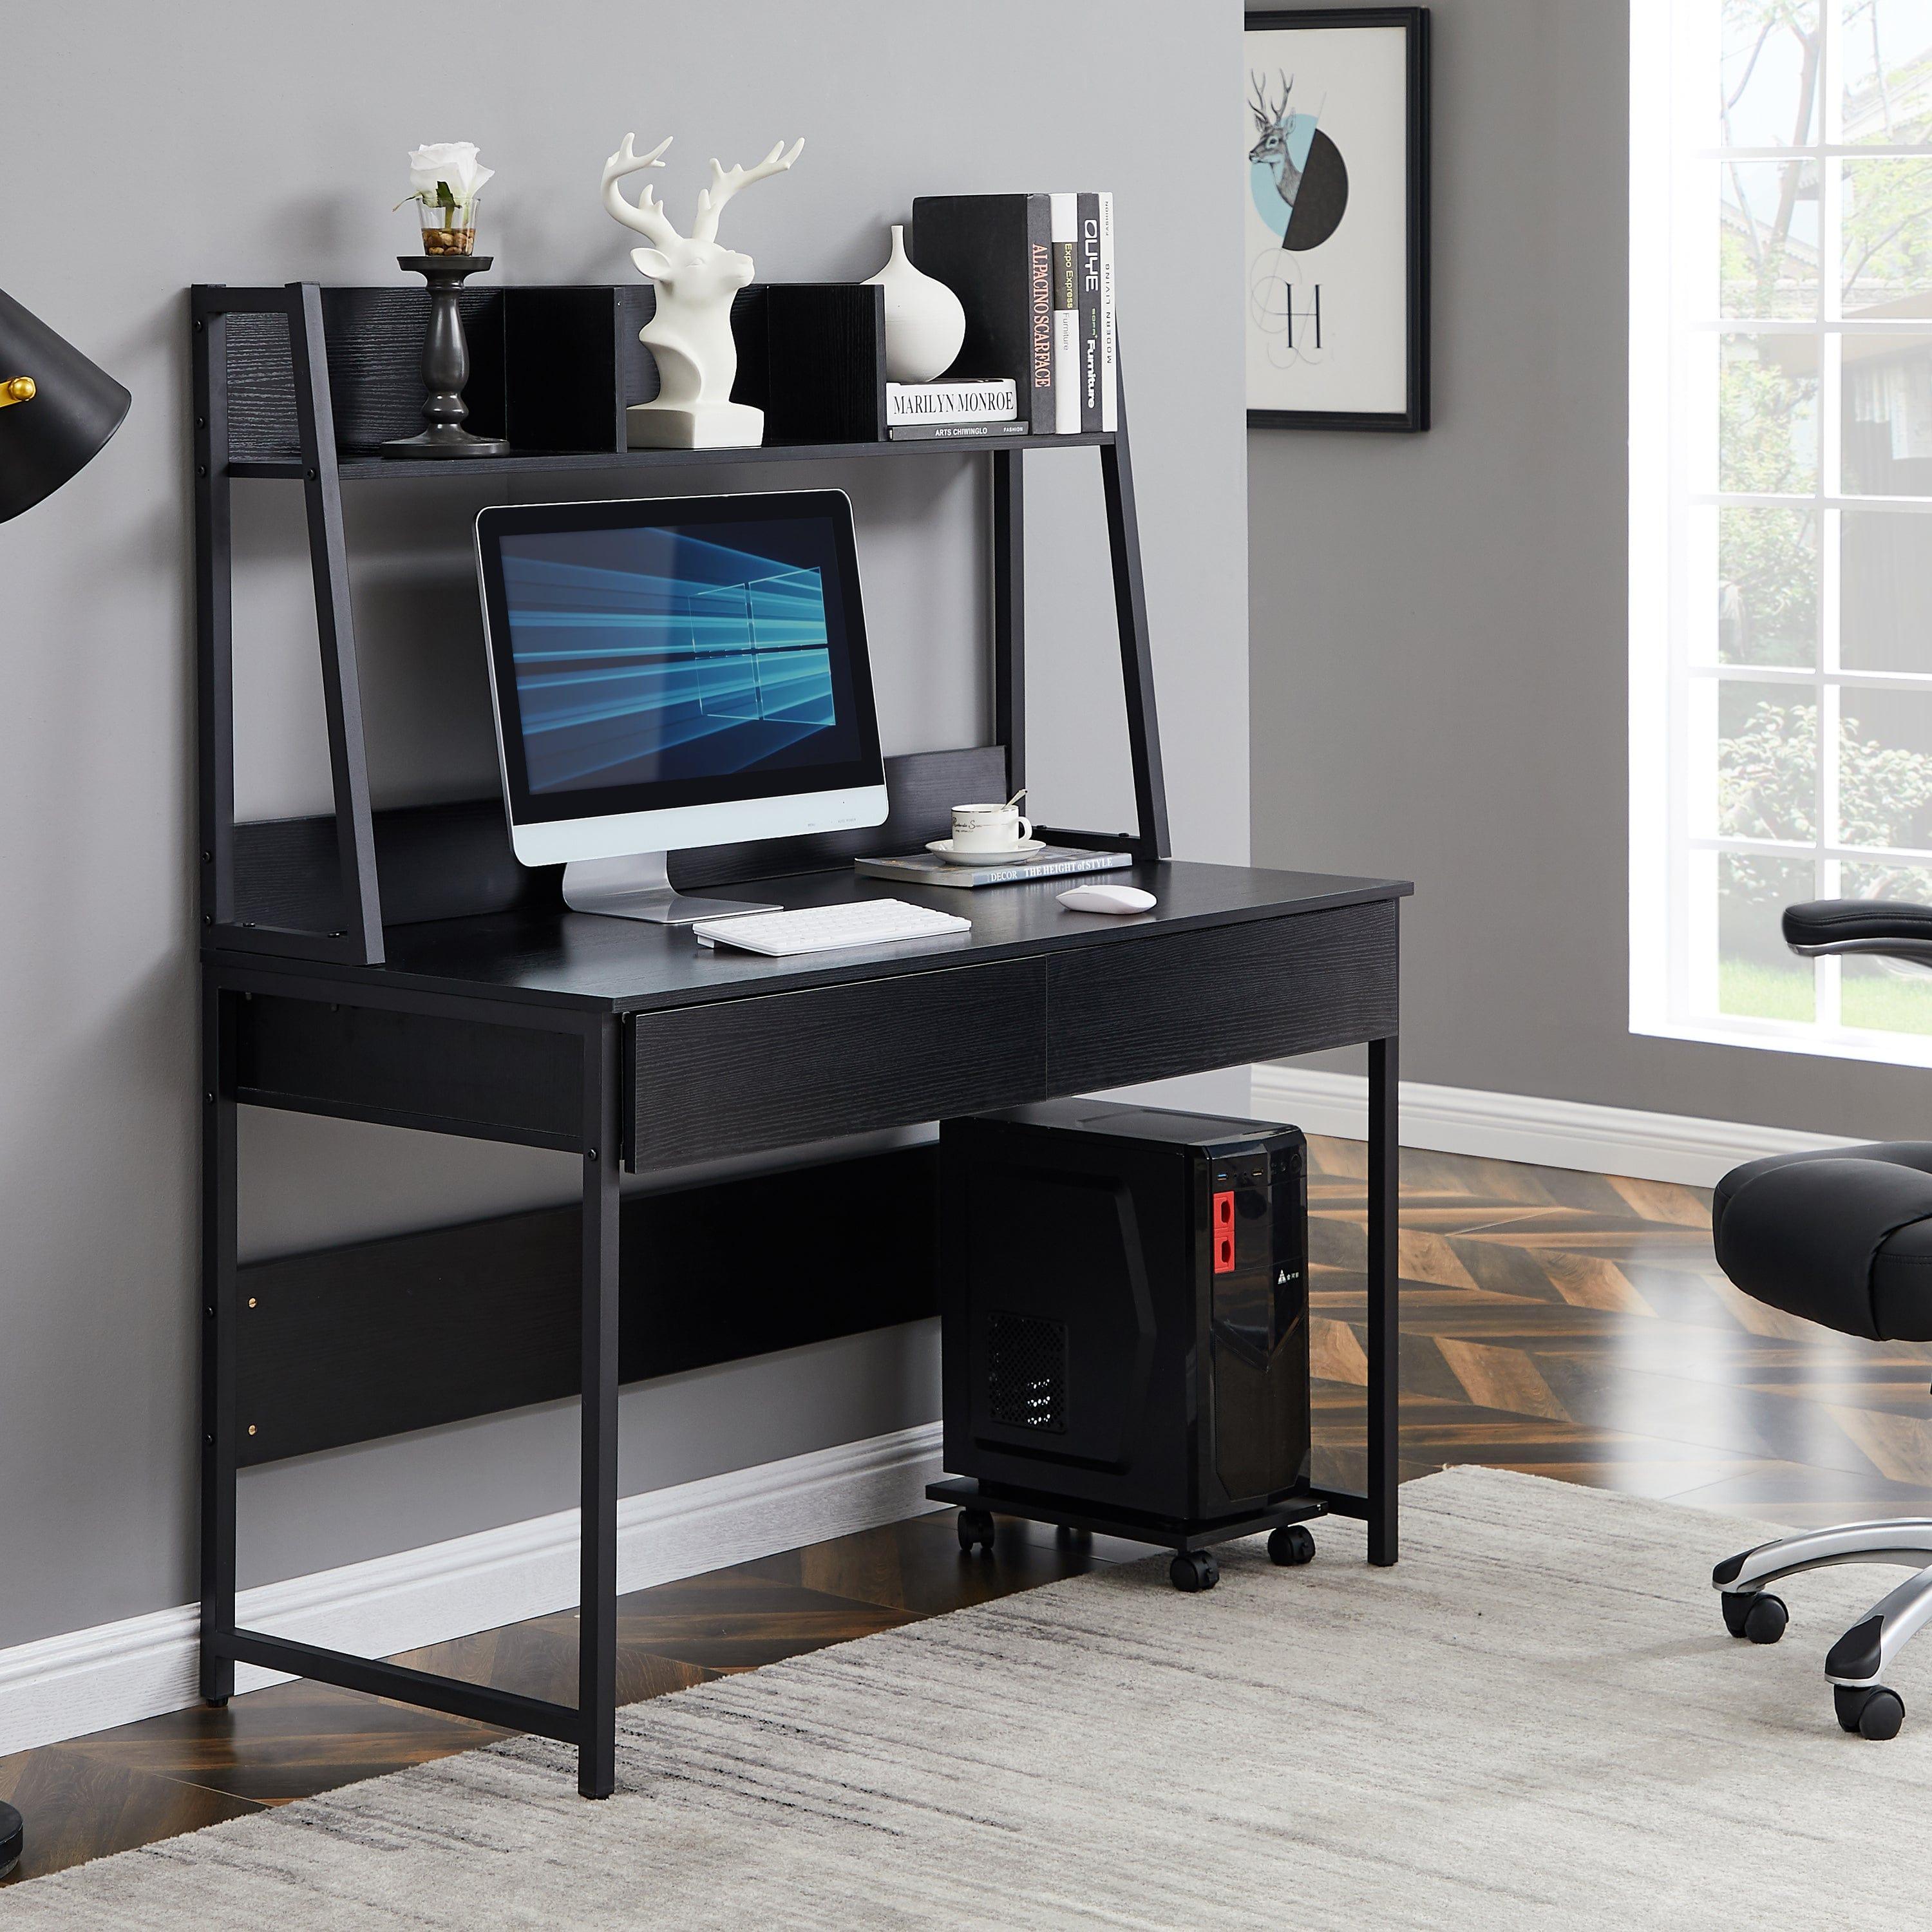 Shop Home office Computer Desk with Hutch/ Bookshelf, Desk with Space Saving Design（Black） Mademoiselle Home Decor